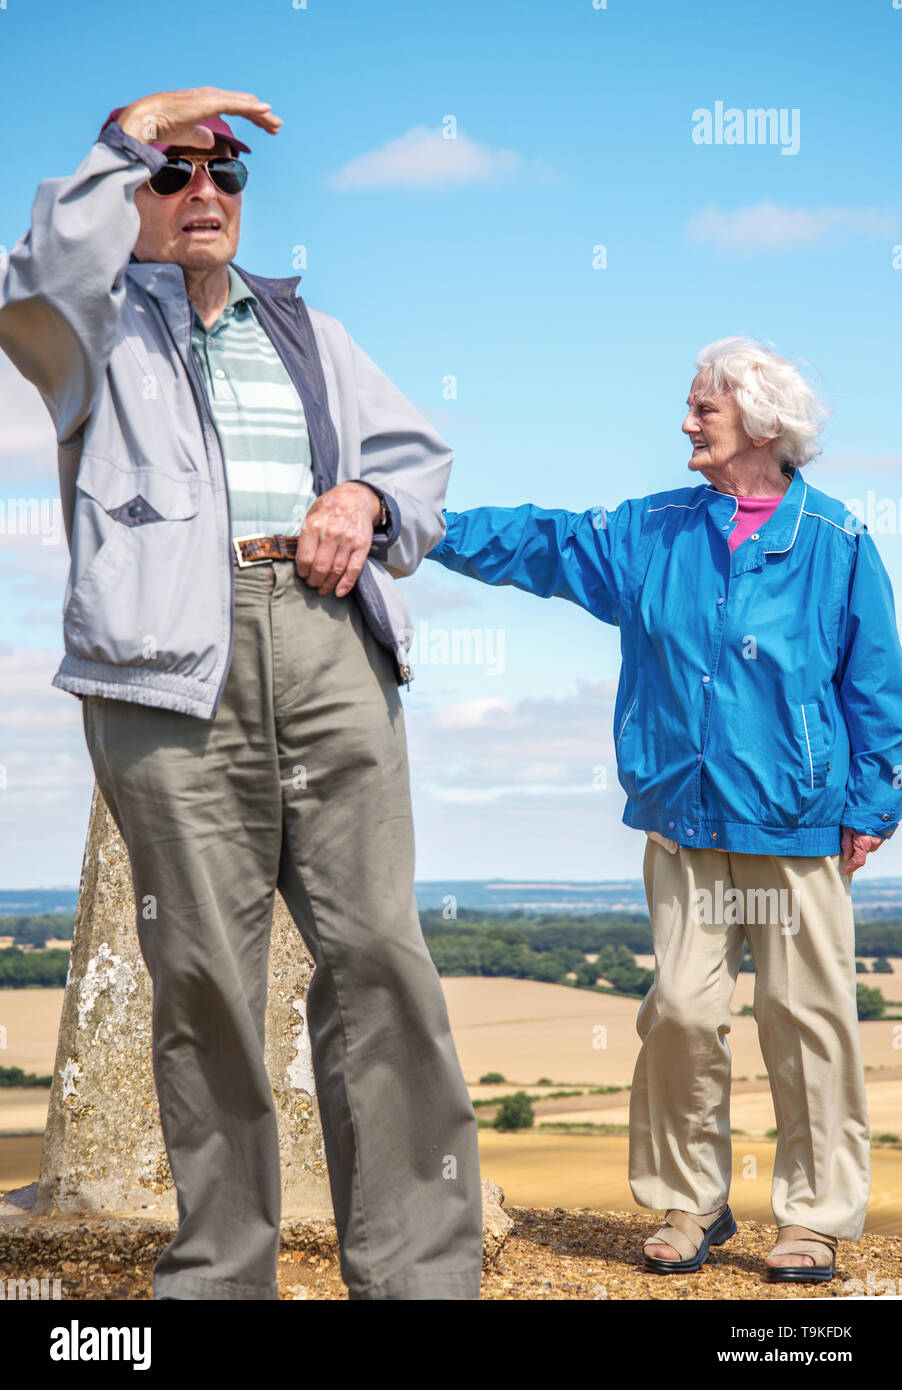 90 year old man takes his wife,who has severe sight loss to the countryside in Wiltshire to get her out in nature and away from their house. Stock Photo